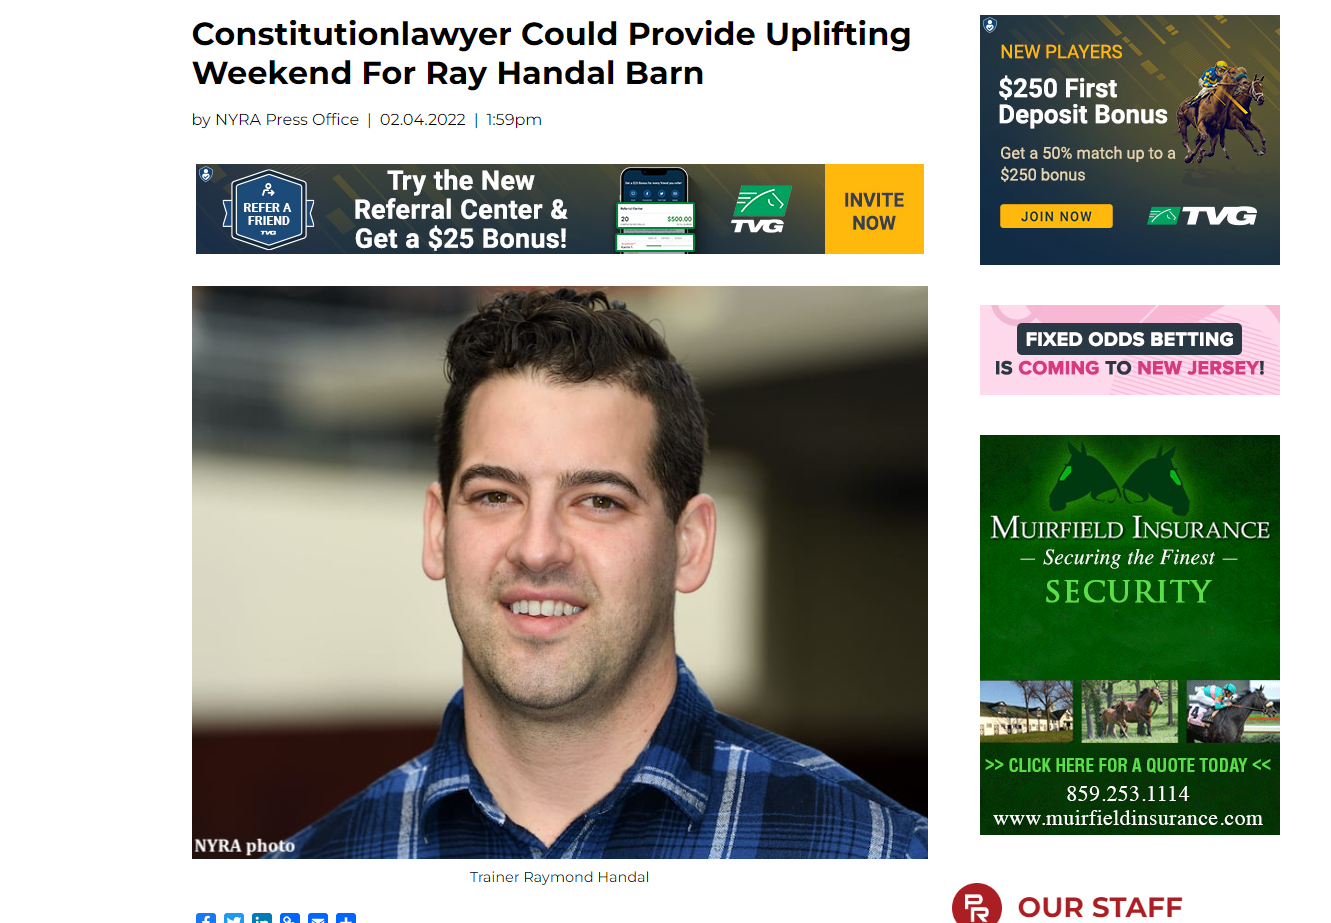 Constitutionlawyer Could Uplift 2/4/22